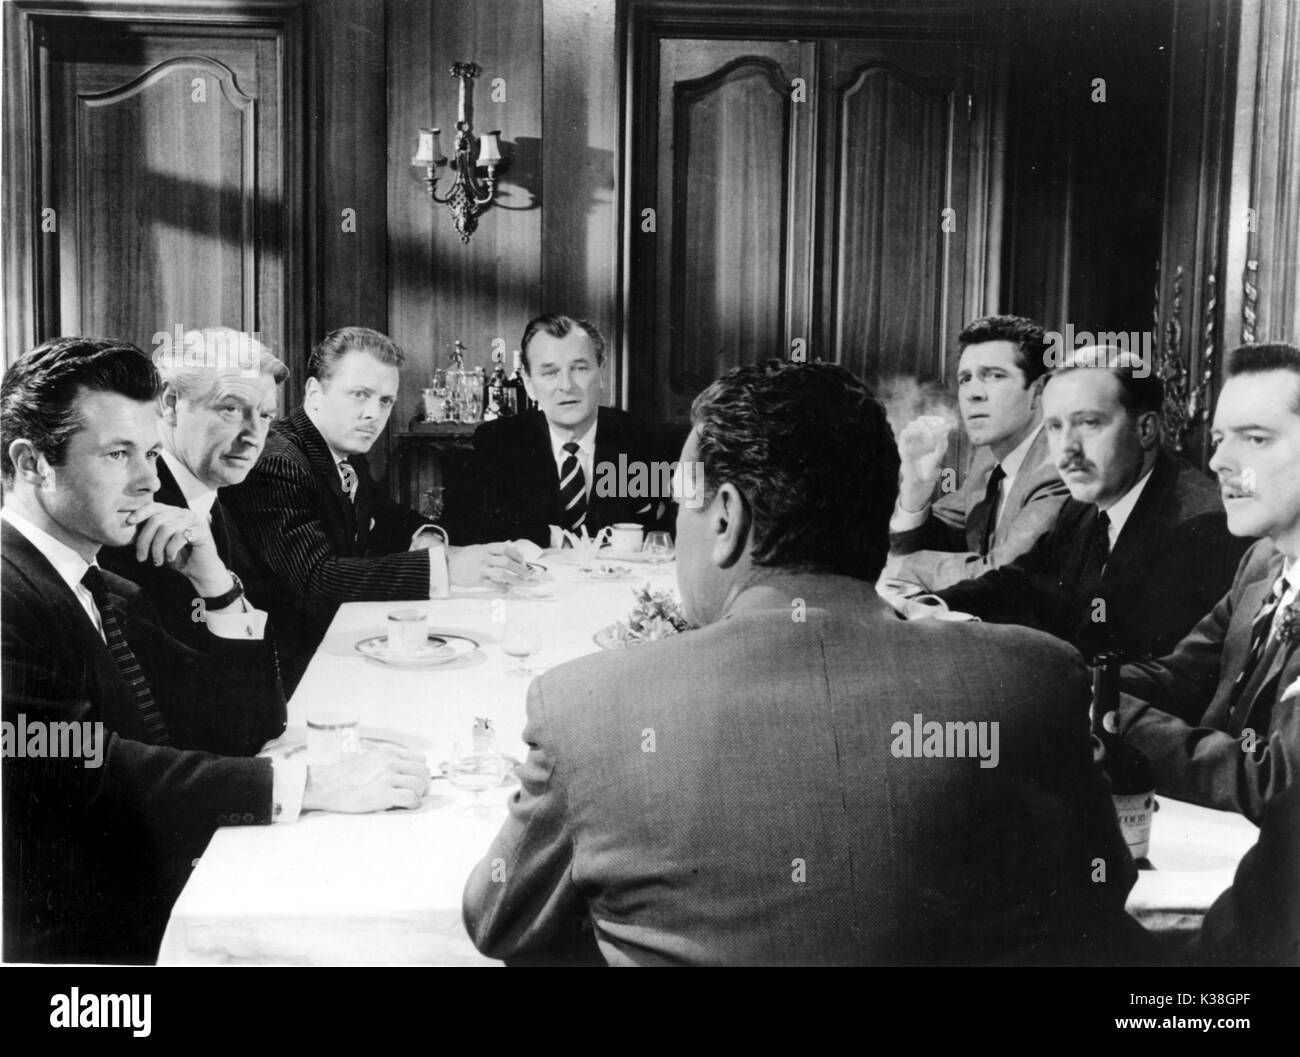 THE LEAGUE OF GENTLEMEN L-R: BRYAN FORBES, ROGER LIVESEY, RICHARD ATTENBOROUGH, NIGEL PATRICK, KIERON MOORE, NORMAN BIRD, TERENCE ALEXANDER and, with back to us, JACK HAWKINS Stock Photo